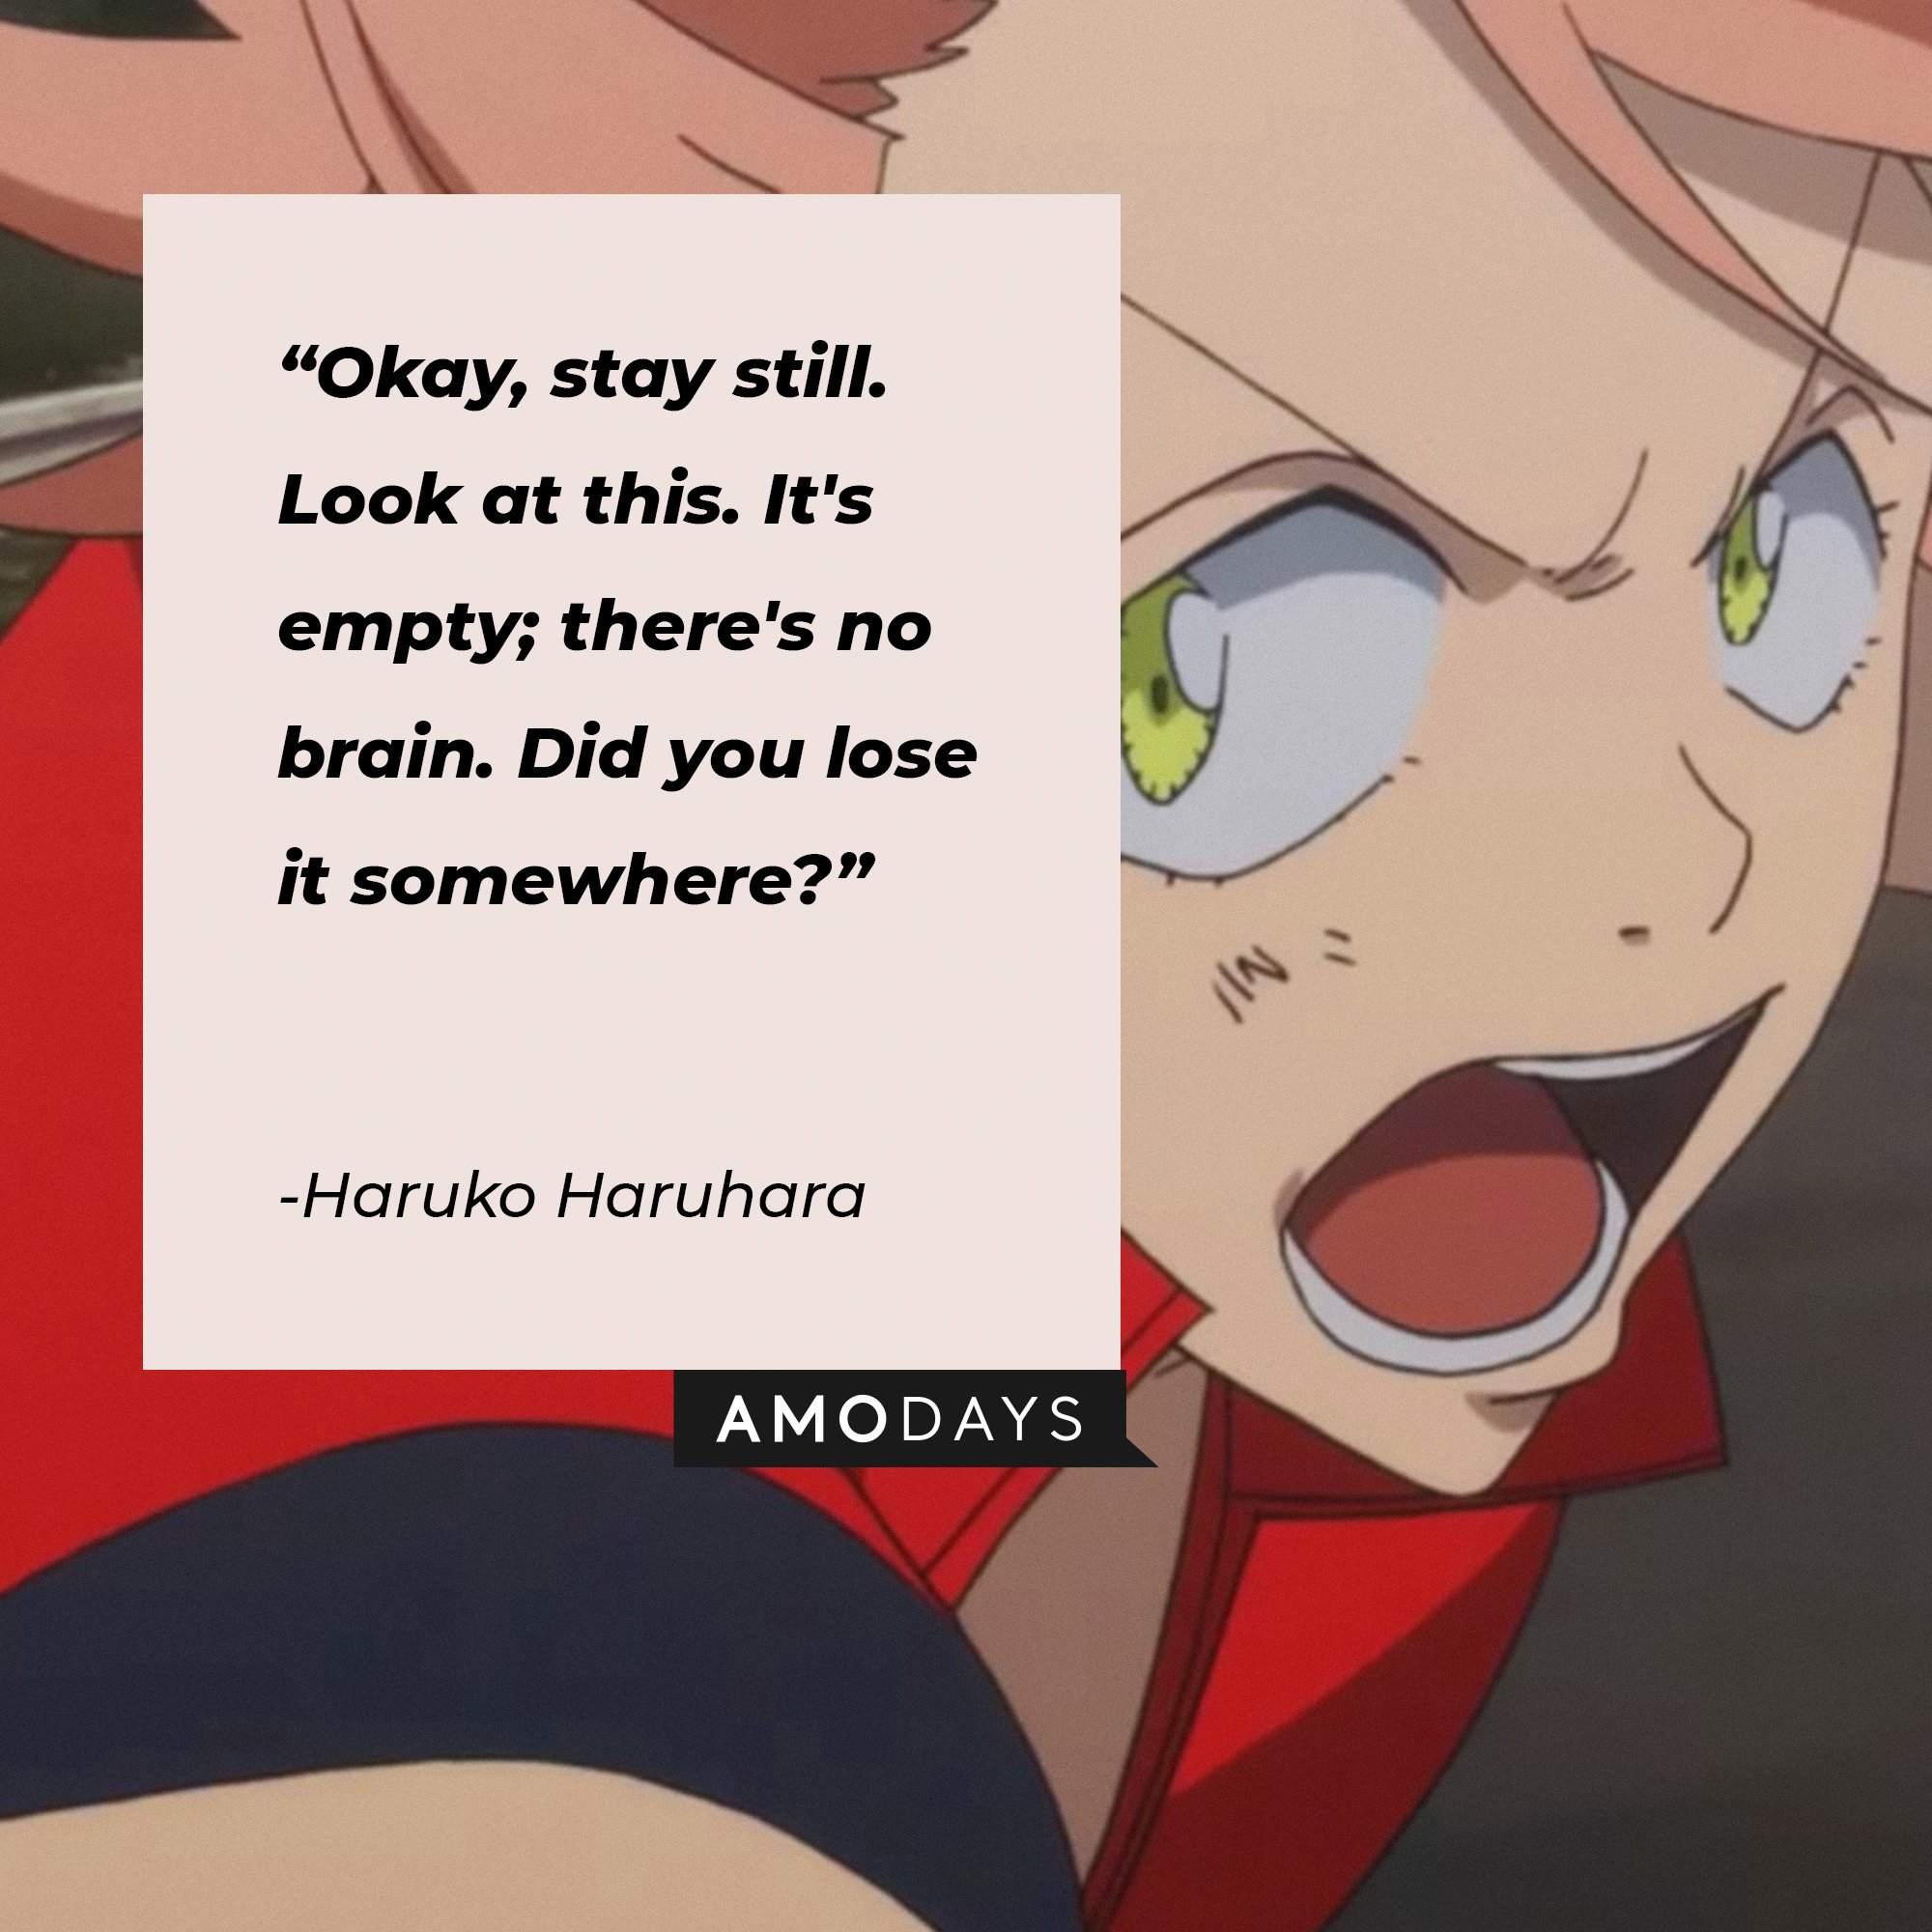 Haruko Haruhara’s quote: “Okay, stay still. Look at this. It's empty; there's no brain. Did you lose it somewhere?”| Image: AmoDays